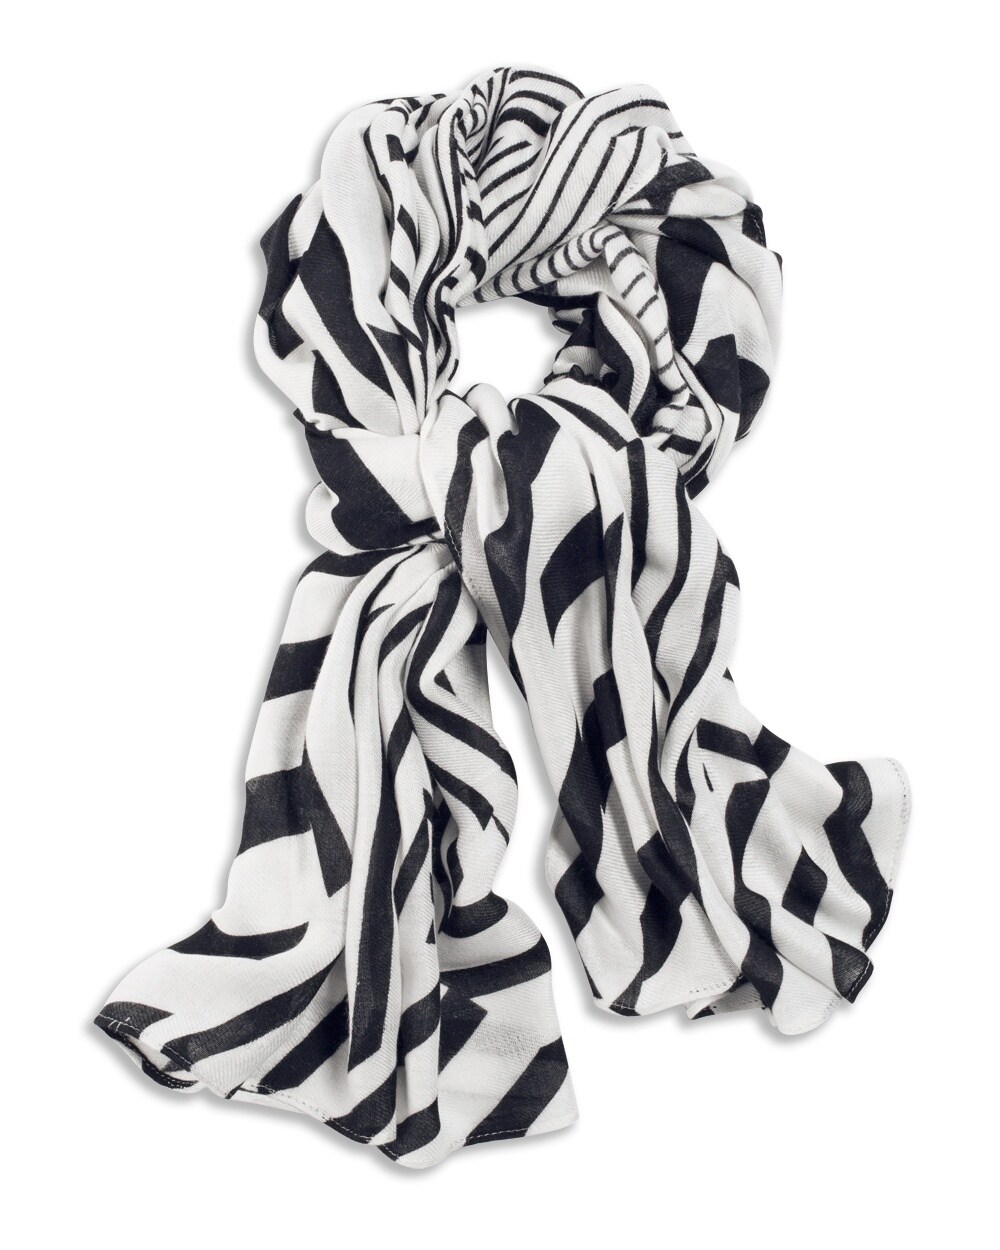 Black-and-White Striped Scarf